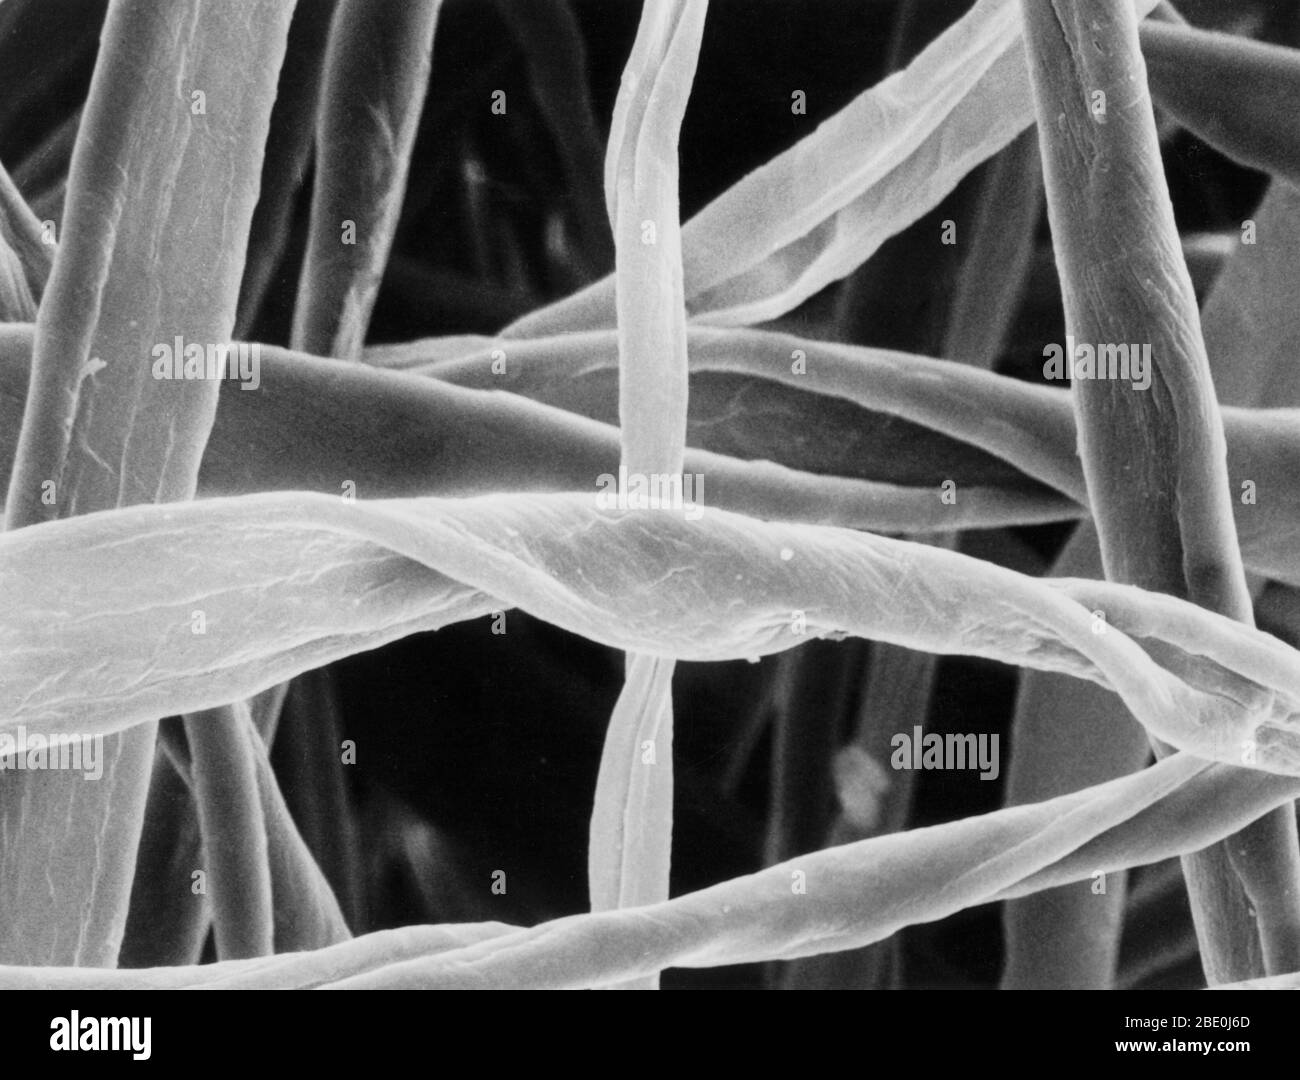 Cotton swab fibers views under a scanning electron microscope. The individual twisted strands are fibers of cotton that comprise the soft, absorbent tip of the typical cotton swab. Each of the fibers seen in this photo is approximately 15 microns. (2000x magnification). Stock Photo